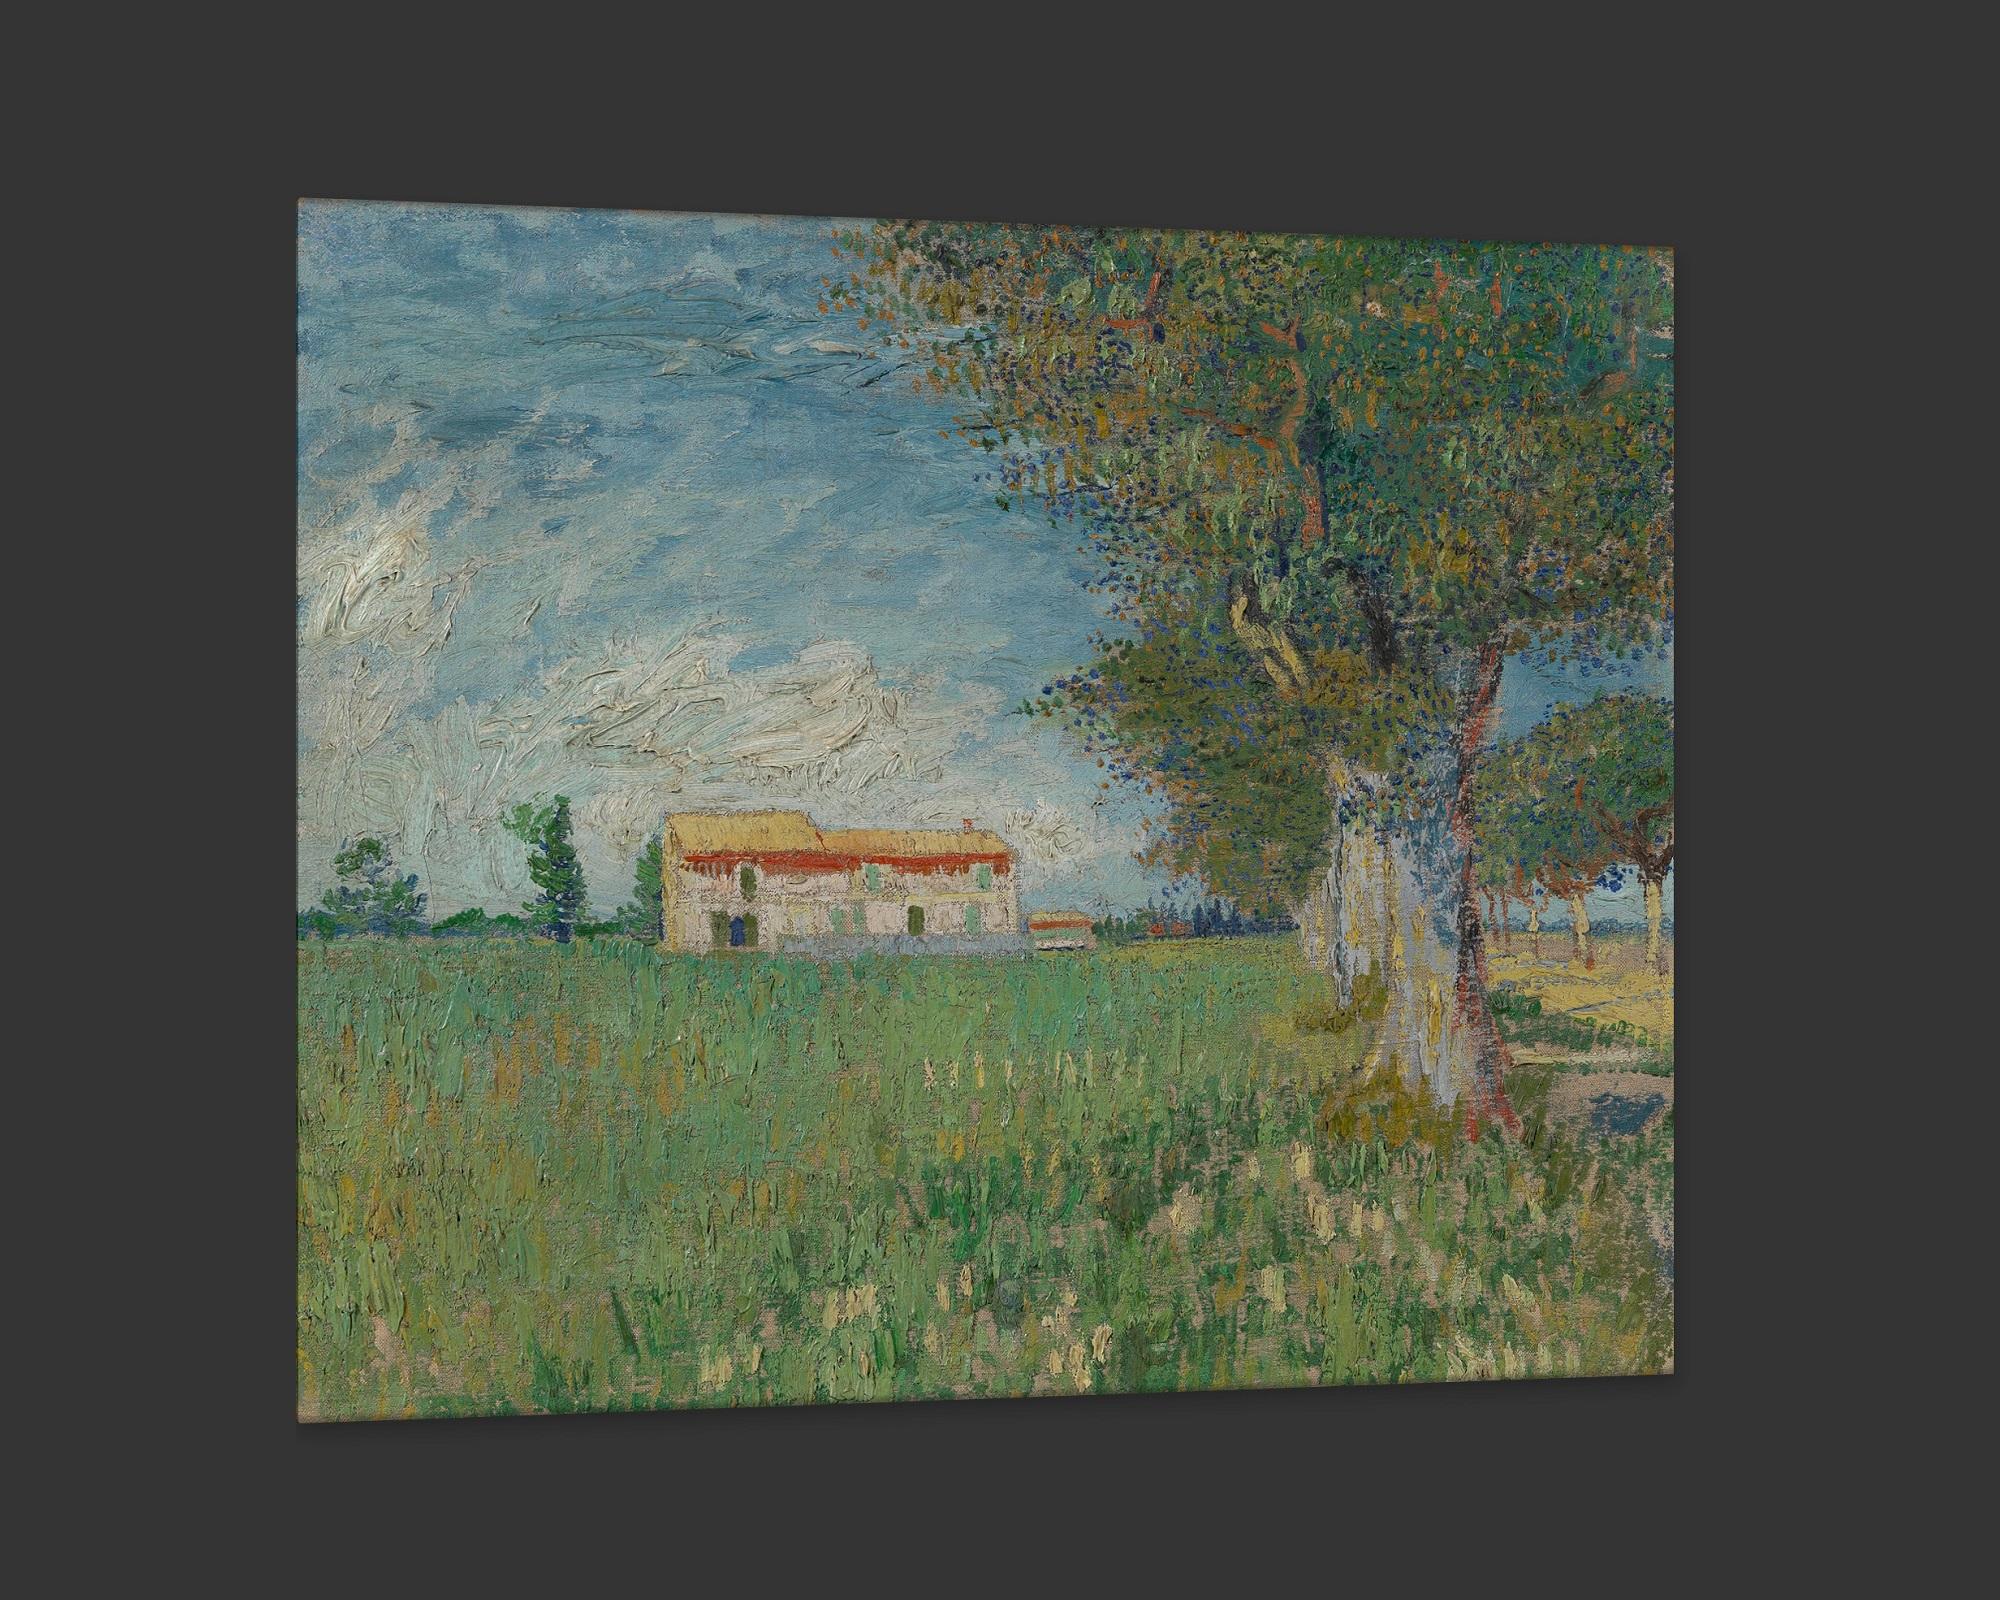 Modern Farmhouse Near Arles, after Impressionist Oil Painting by Vincent van Gogh For Sale